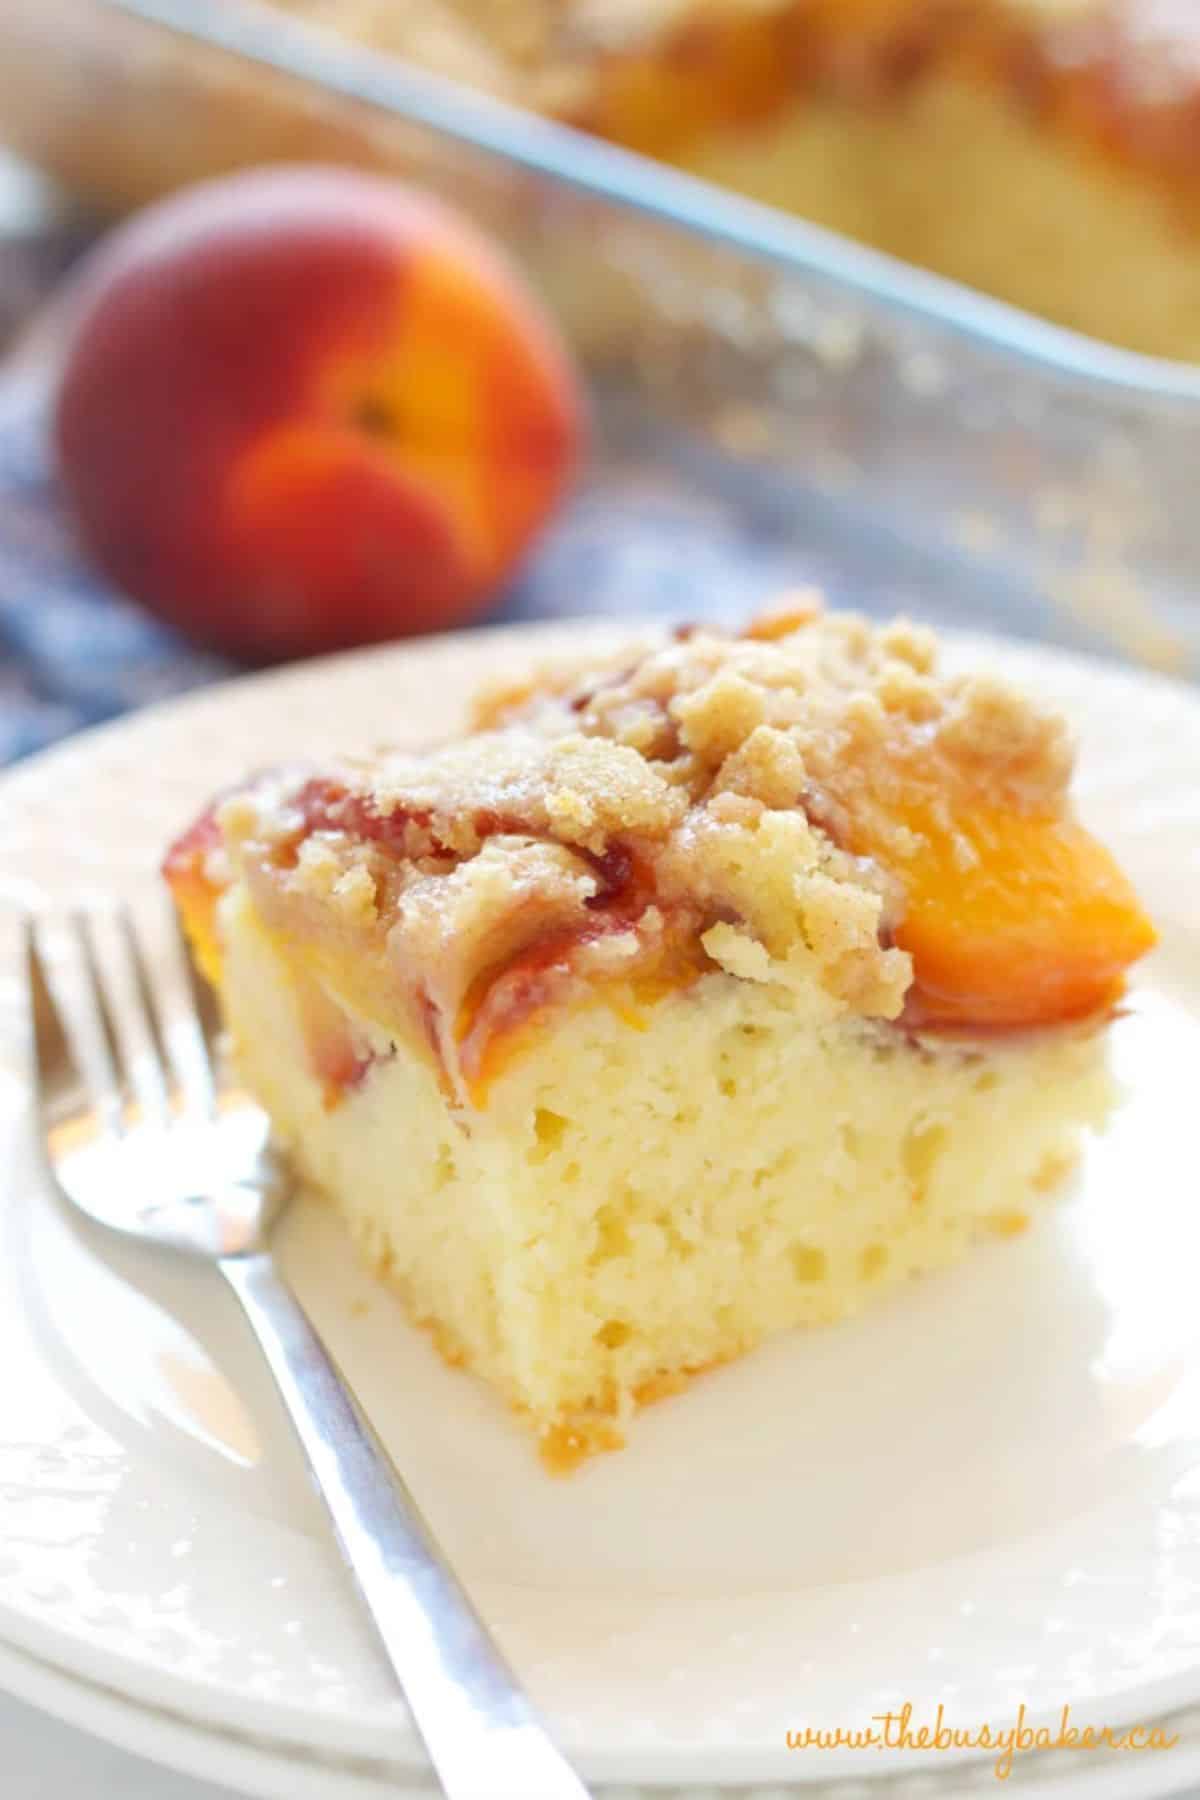 A piece of flavorful peach streusel cake on a plate with a fork.